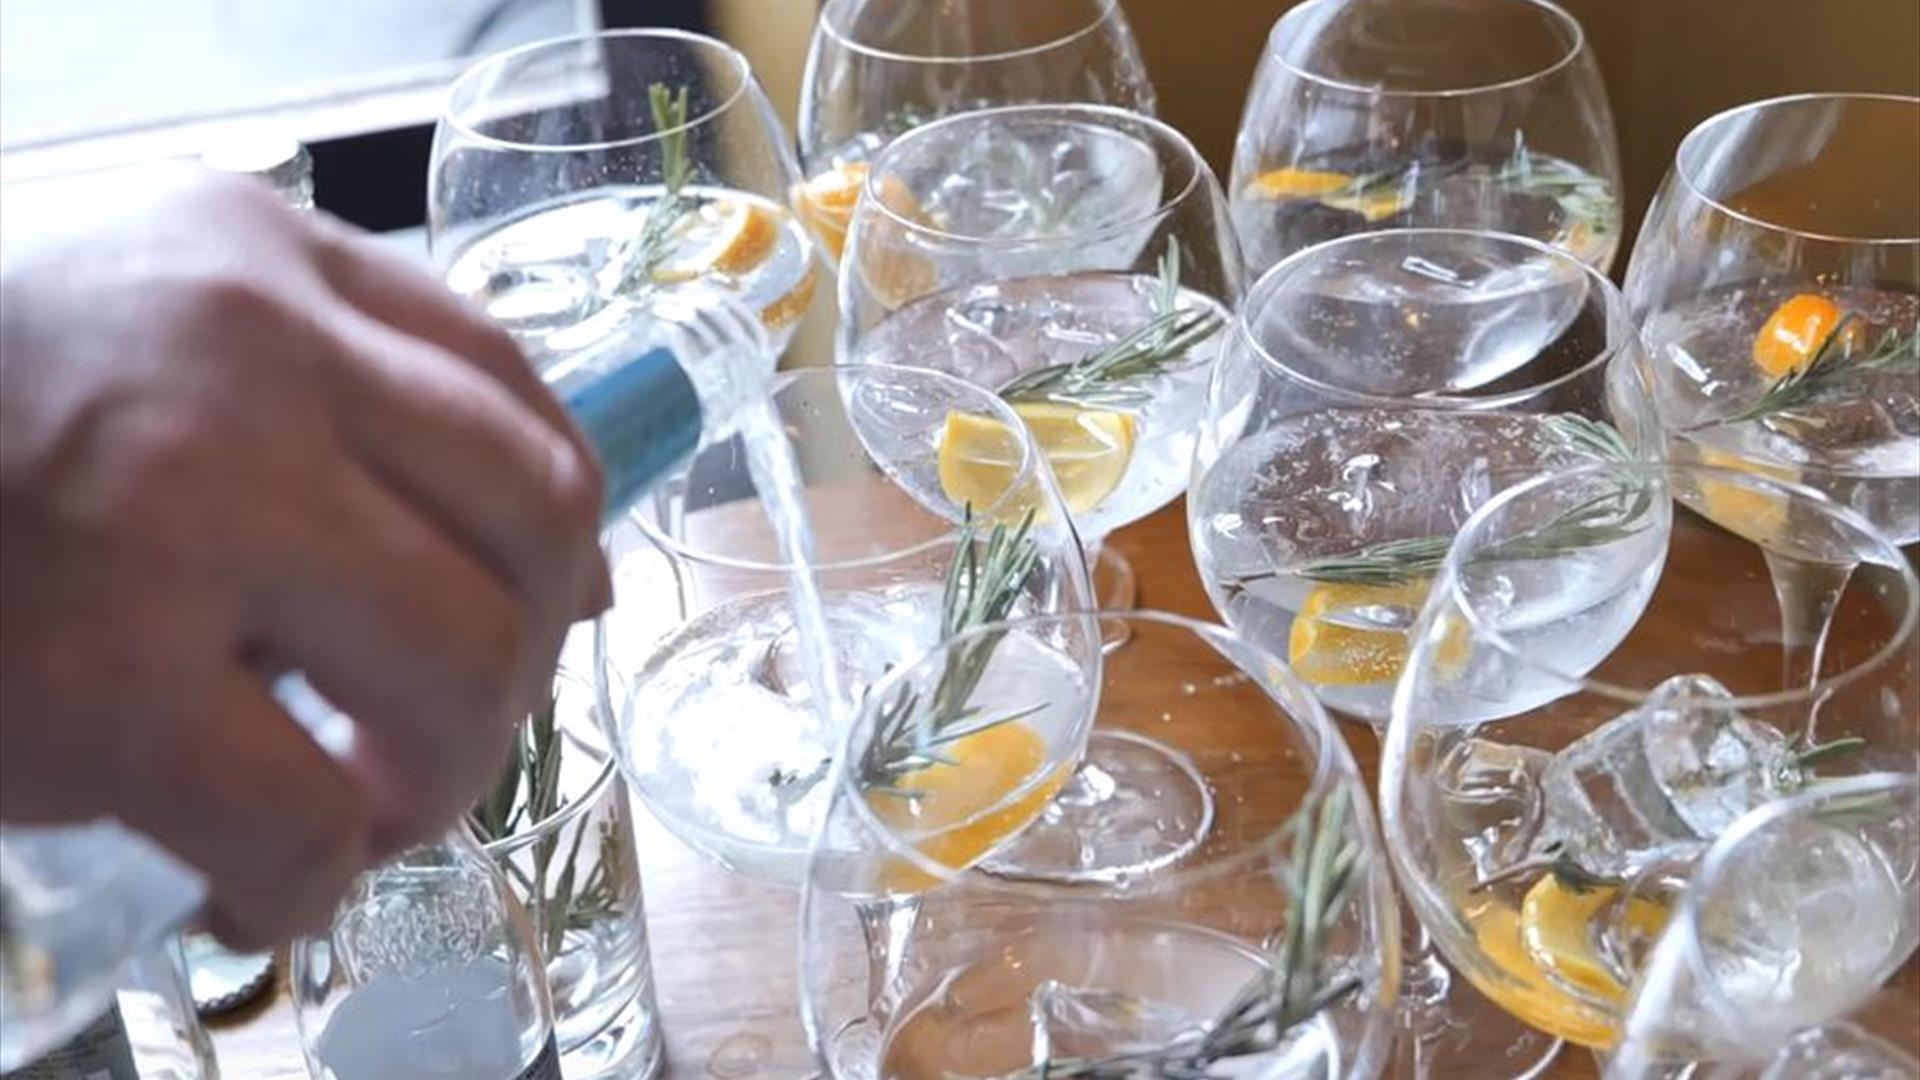 Gin glasses being filled